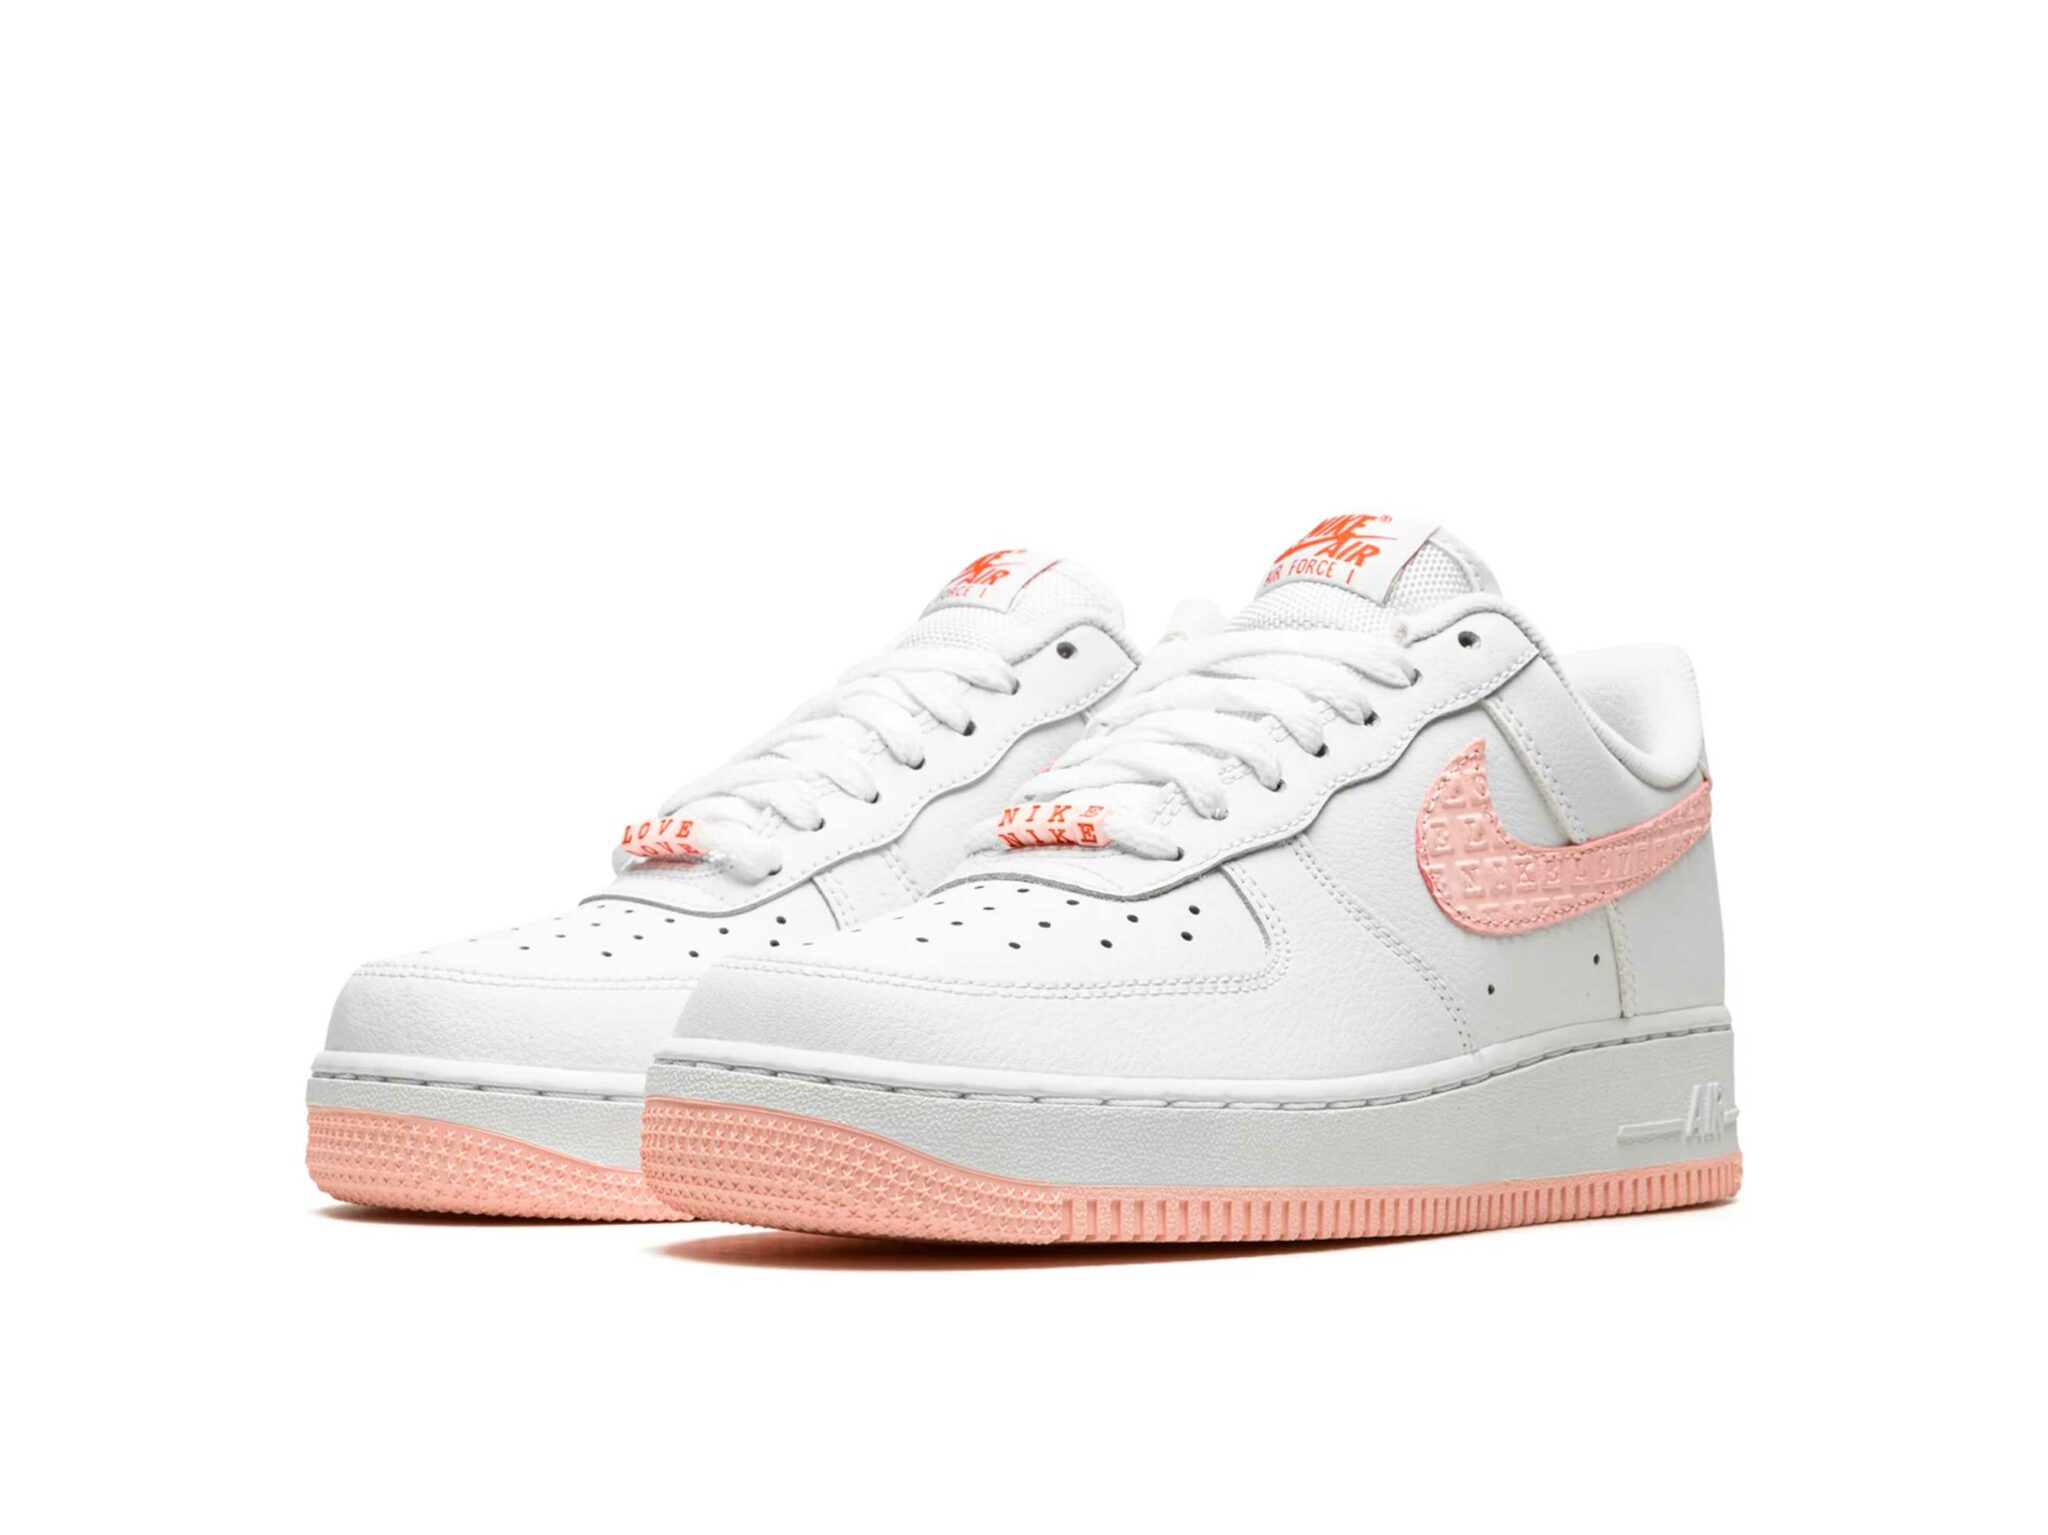 Nike Air Force 1 Low Valentine s Day 2022. Nike Air Force 1 Low Valentines Day. DQ 023-100 Nike Force. Nike Air Force 1 Low Valentine s Day 2024 с блёстками в СВУШЕ. Air force 1 low valentine s day